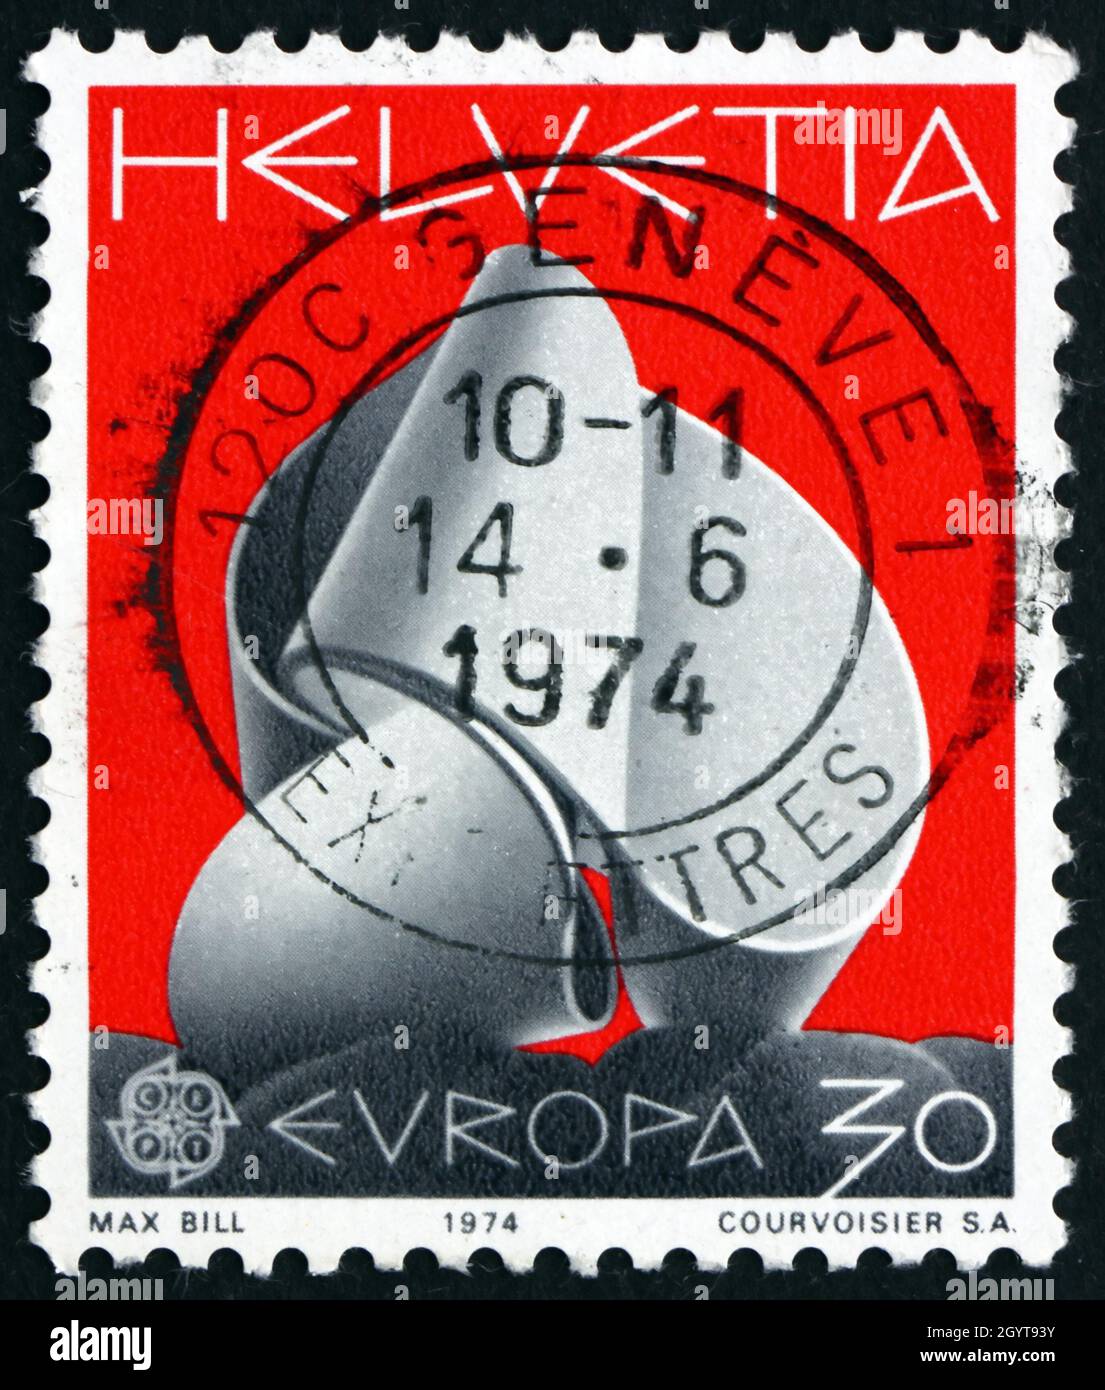 SWITZERLAND - CIRCA 1974: a stamp printed in the Switzerland shows Continuity, Sculpture by Max Bill, circa 1974 Stock Photo